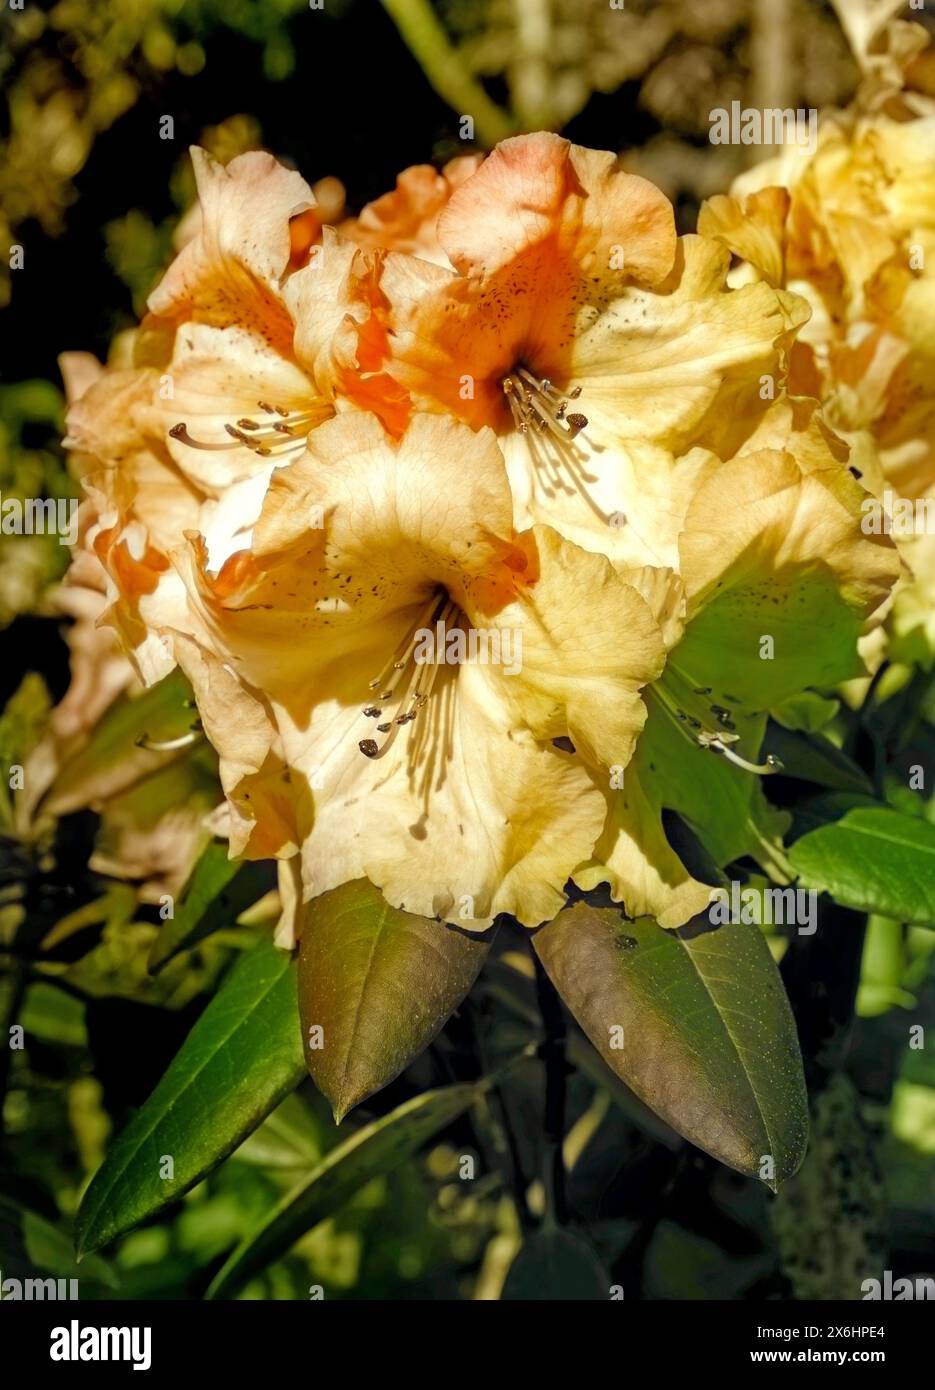 Rhododendron with a pink flowers blossom in the garden, close up, cultivation in Ireland Stock Photo